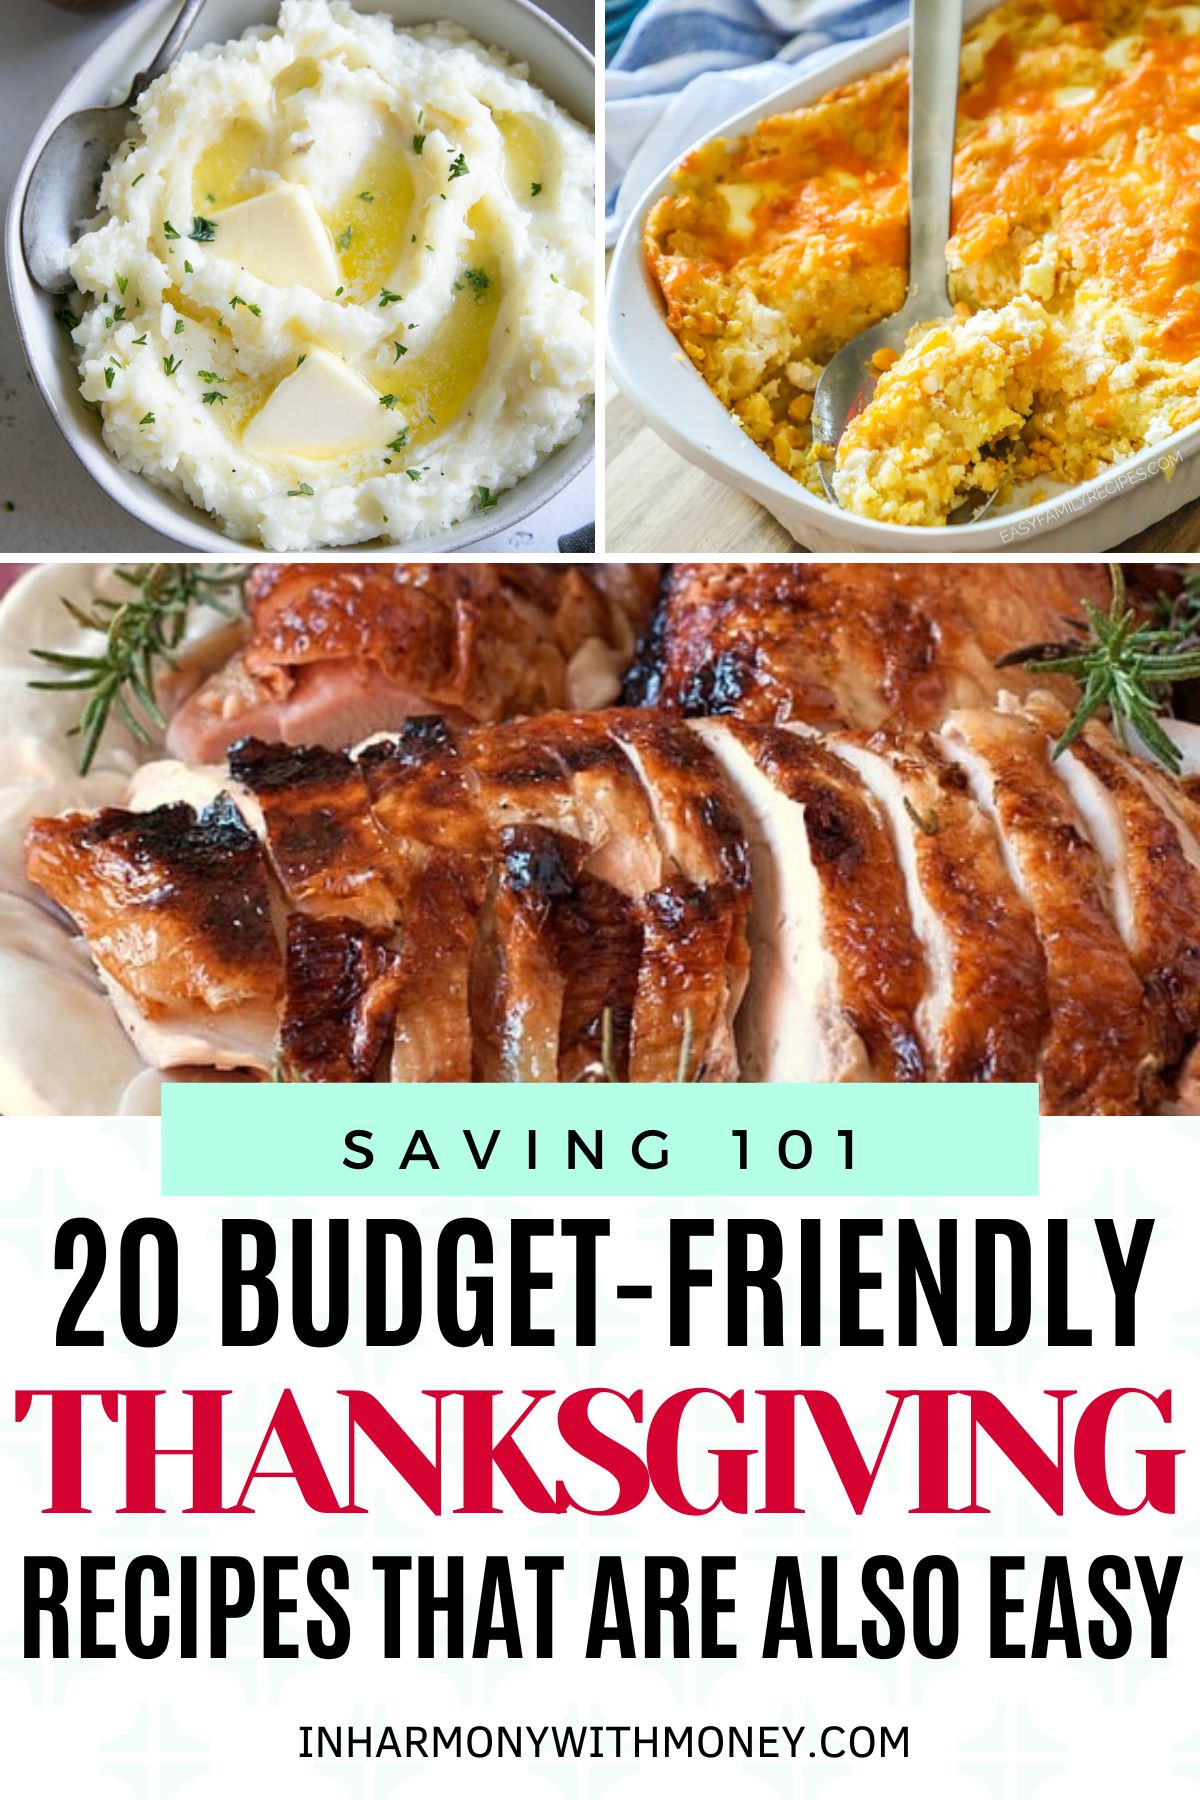 collage of thanksgiving recipes with text 20 budget-friendly thanksgiving recipes that are also easy